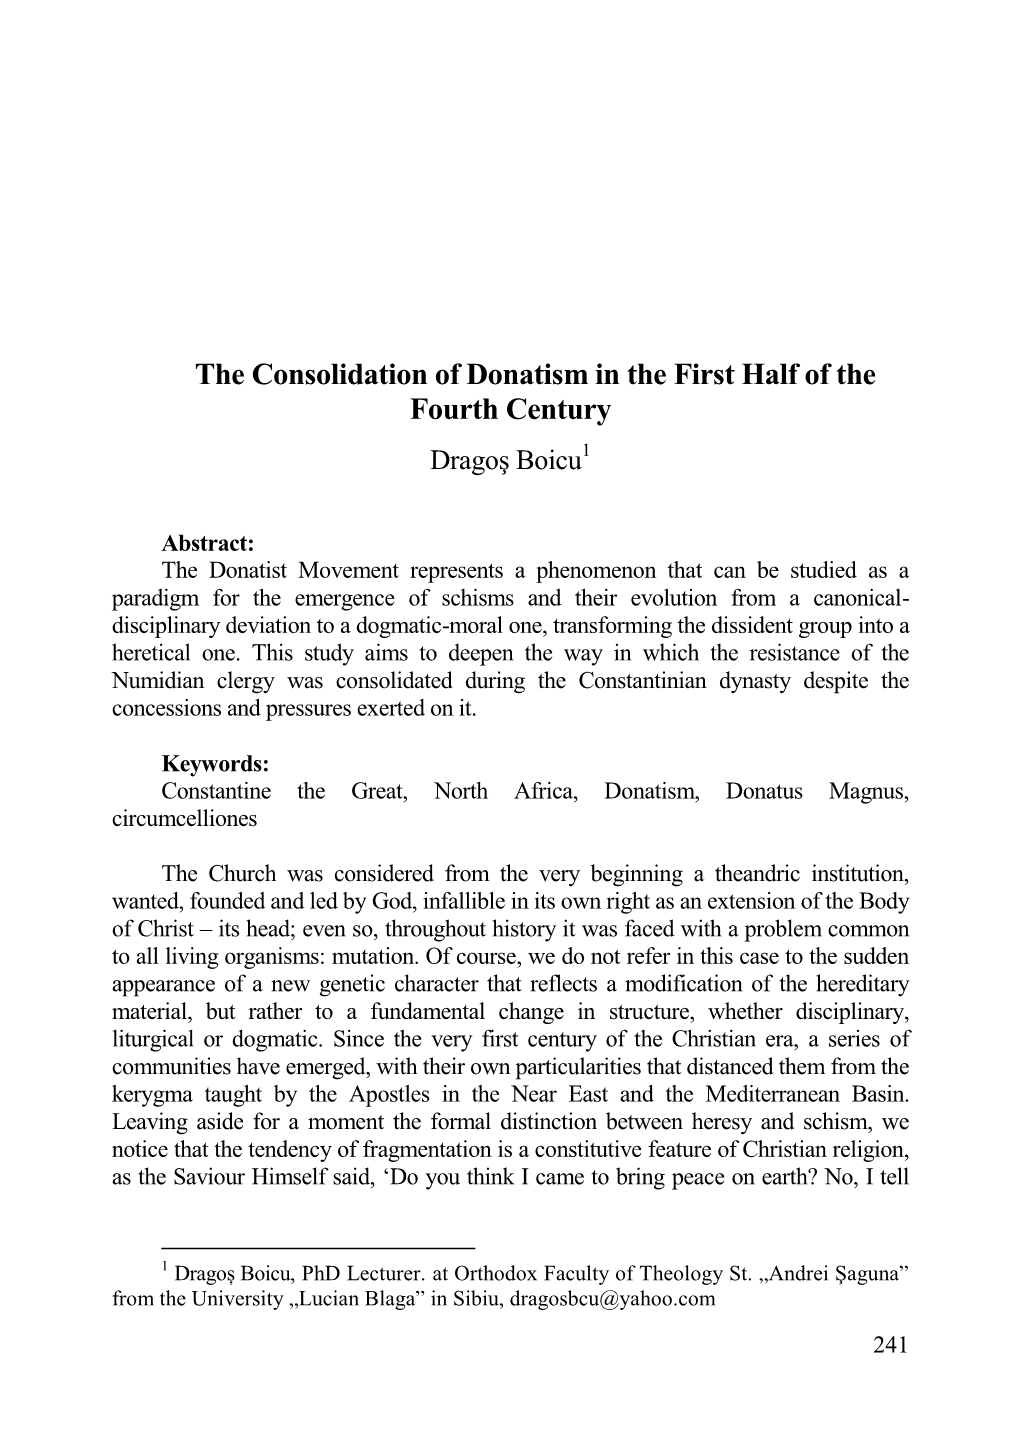 The Consolidation of Donatism in the First Half of the Fourth Century Dragoş Boicu1